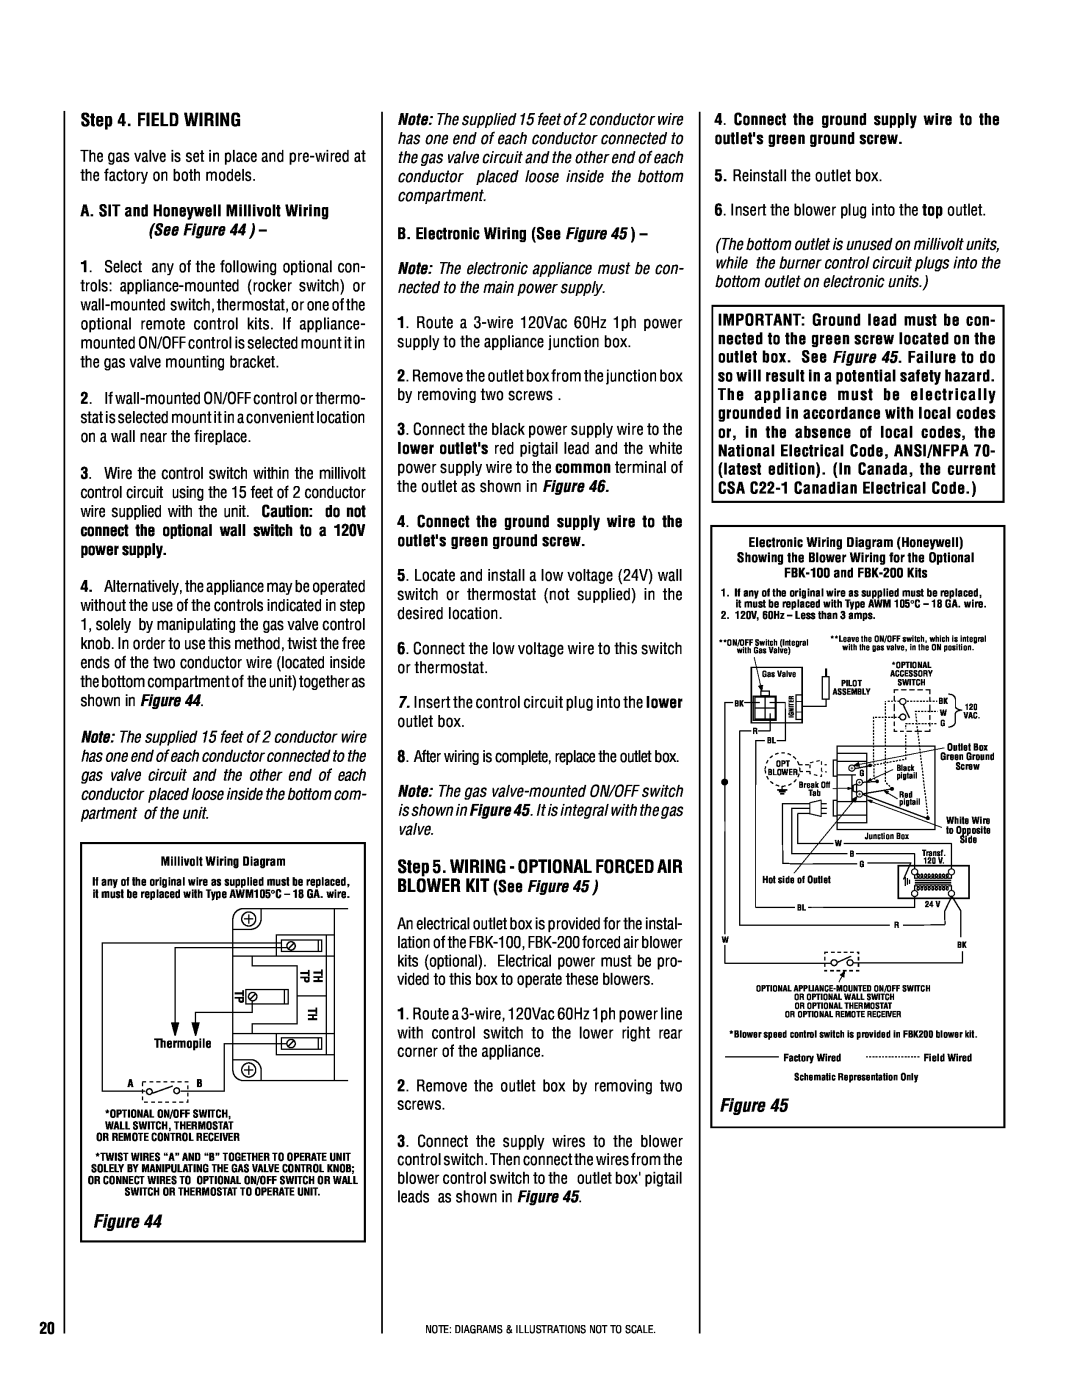 Superior DT-400CMN, DR-400CMP Field Wiring, A. SIT and Honeywell Millivolt Wiring, B. Electronic Wiring See Figure 